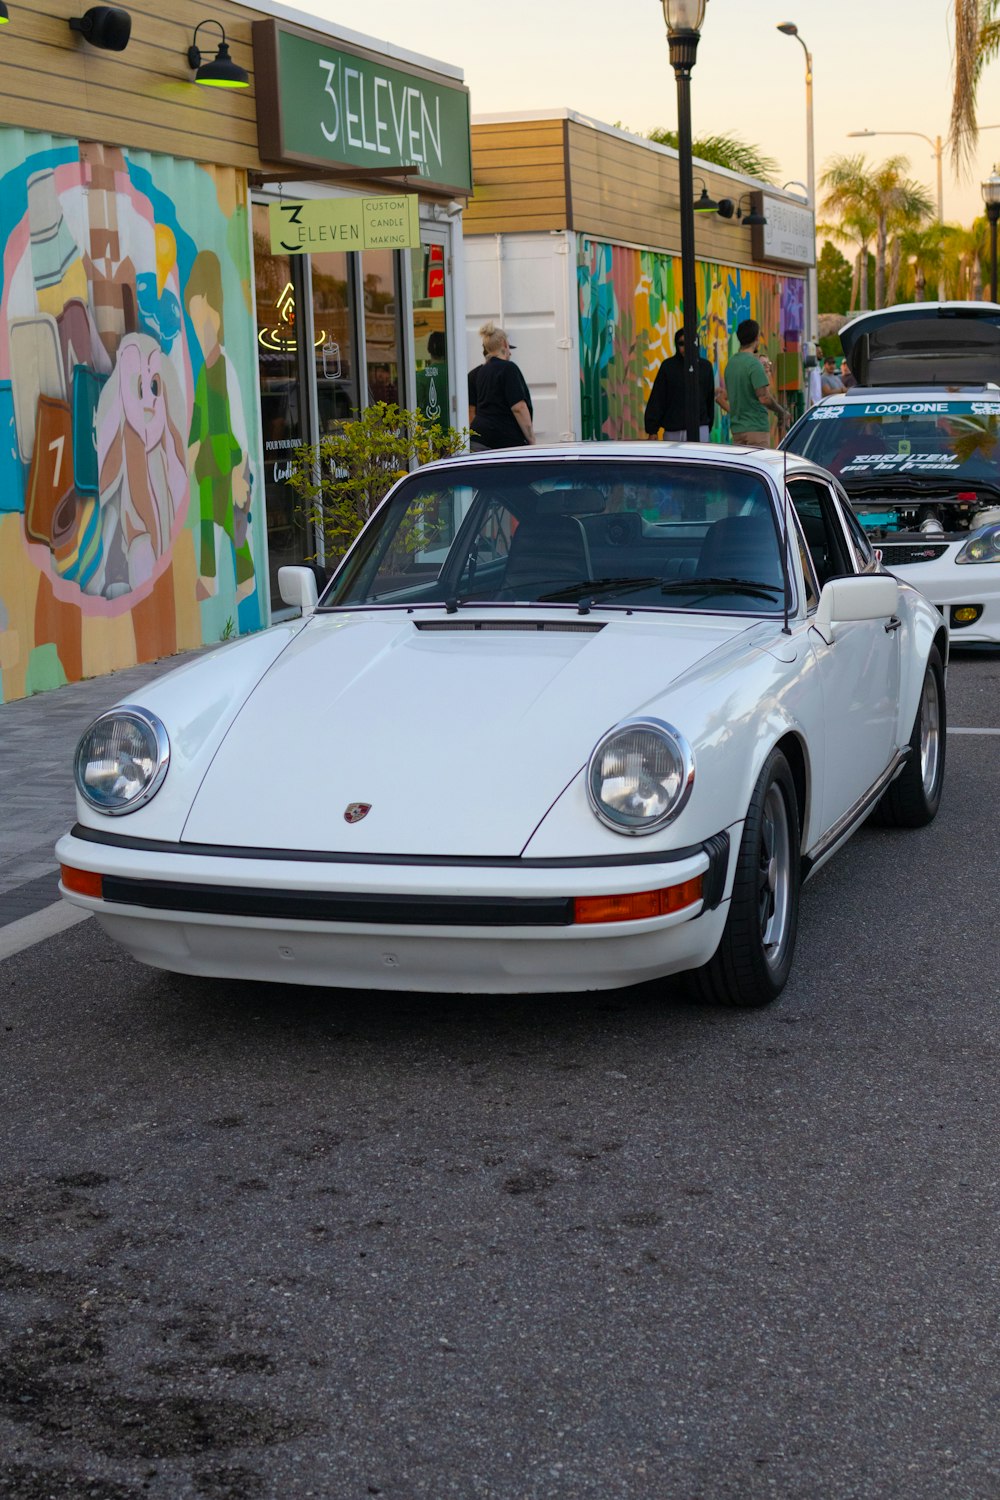 a white porsche parked on the side of the road